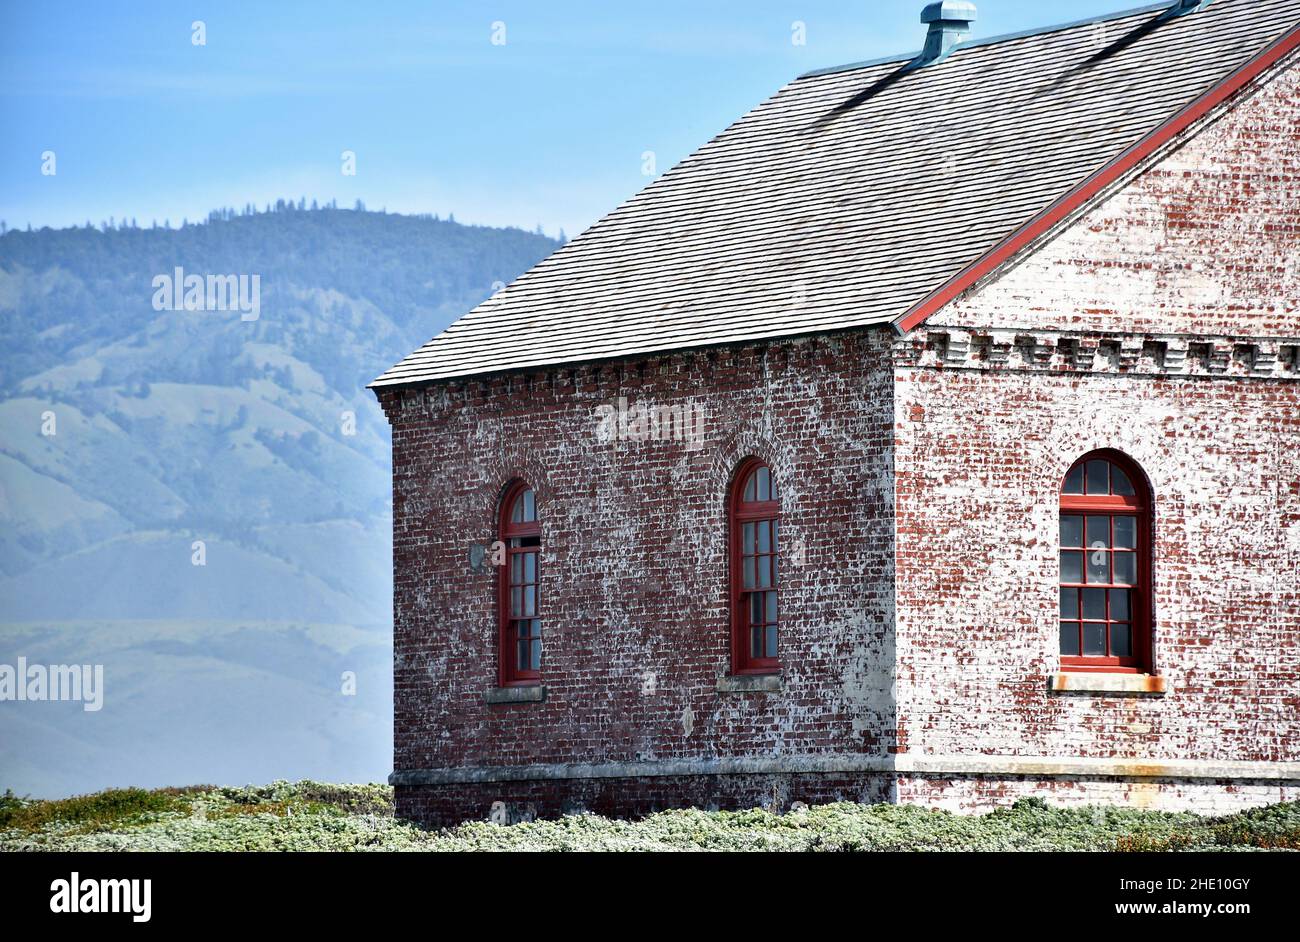 Old Red and White Brick Building with Arched Windows Mountain and Sky Background Stock Photo